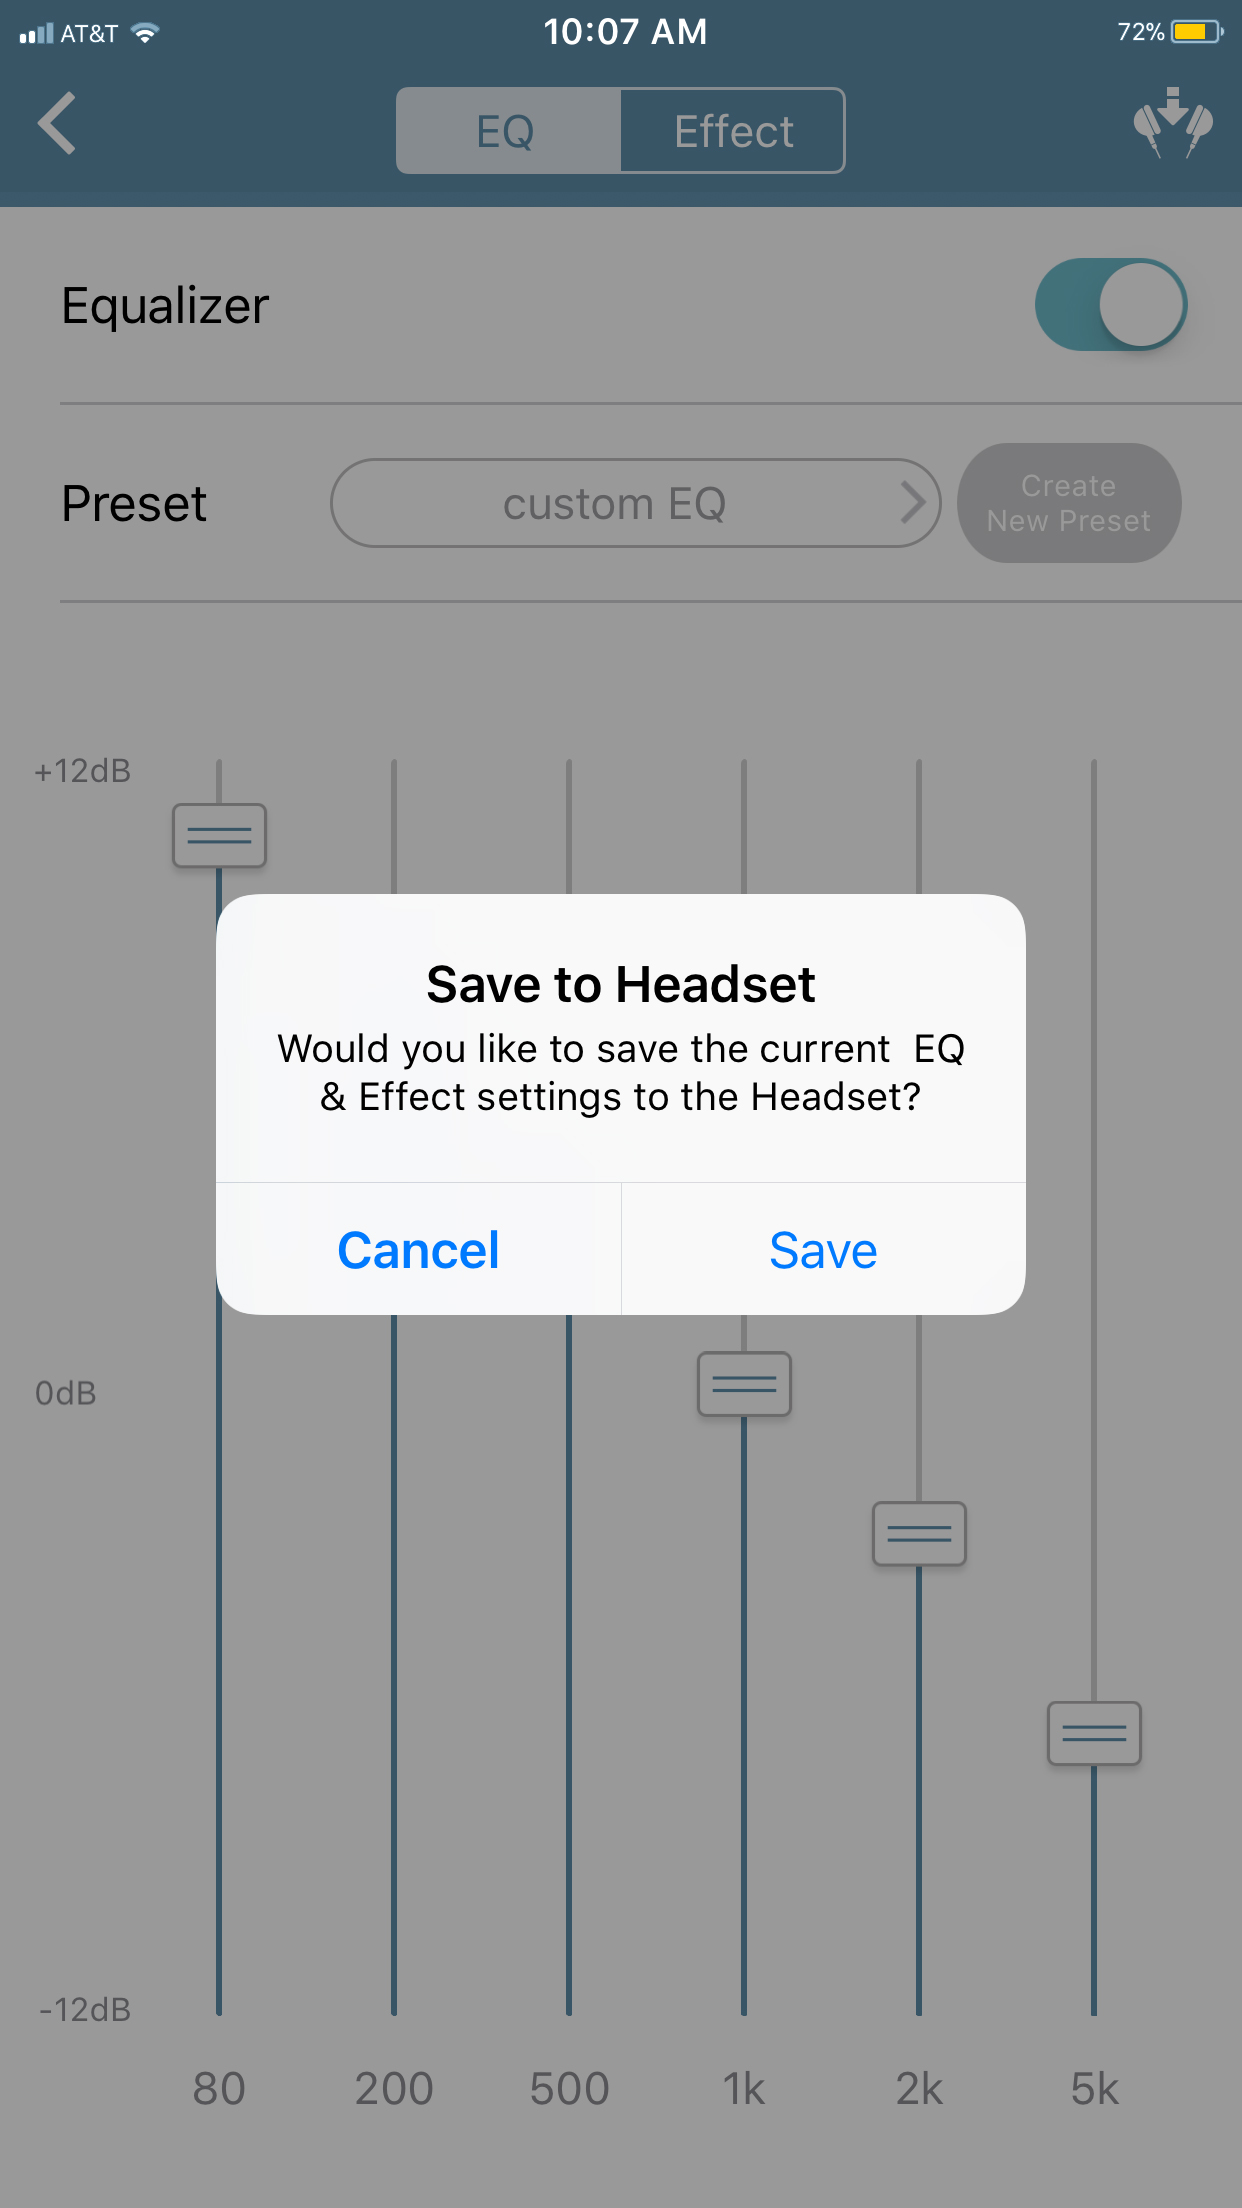 Customizable sound effects saved into headset travel with it for users to enjoy across other music apps and iOS devices